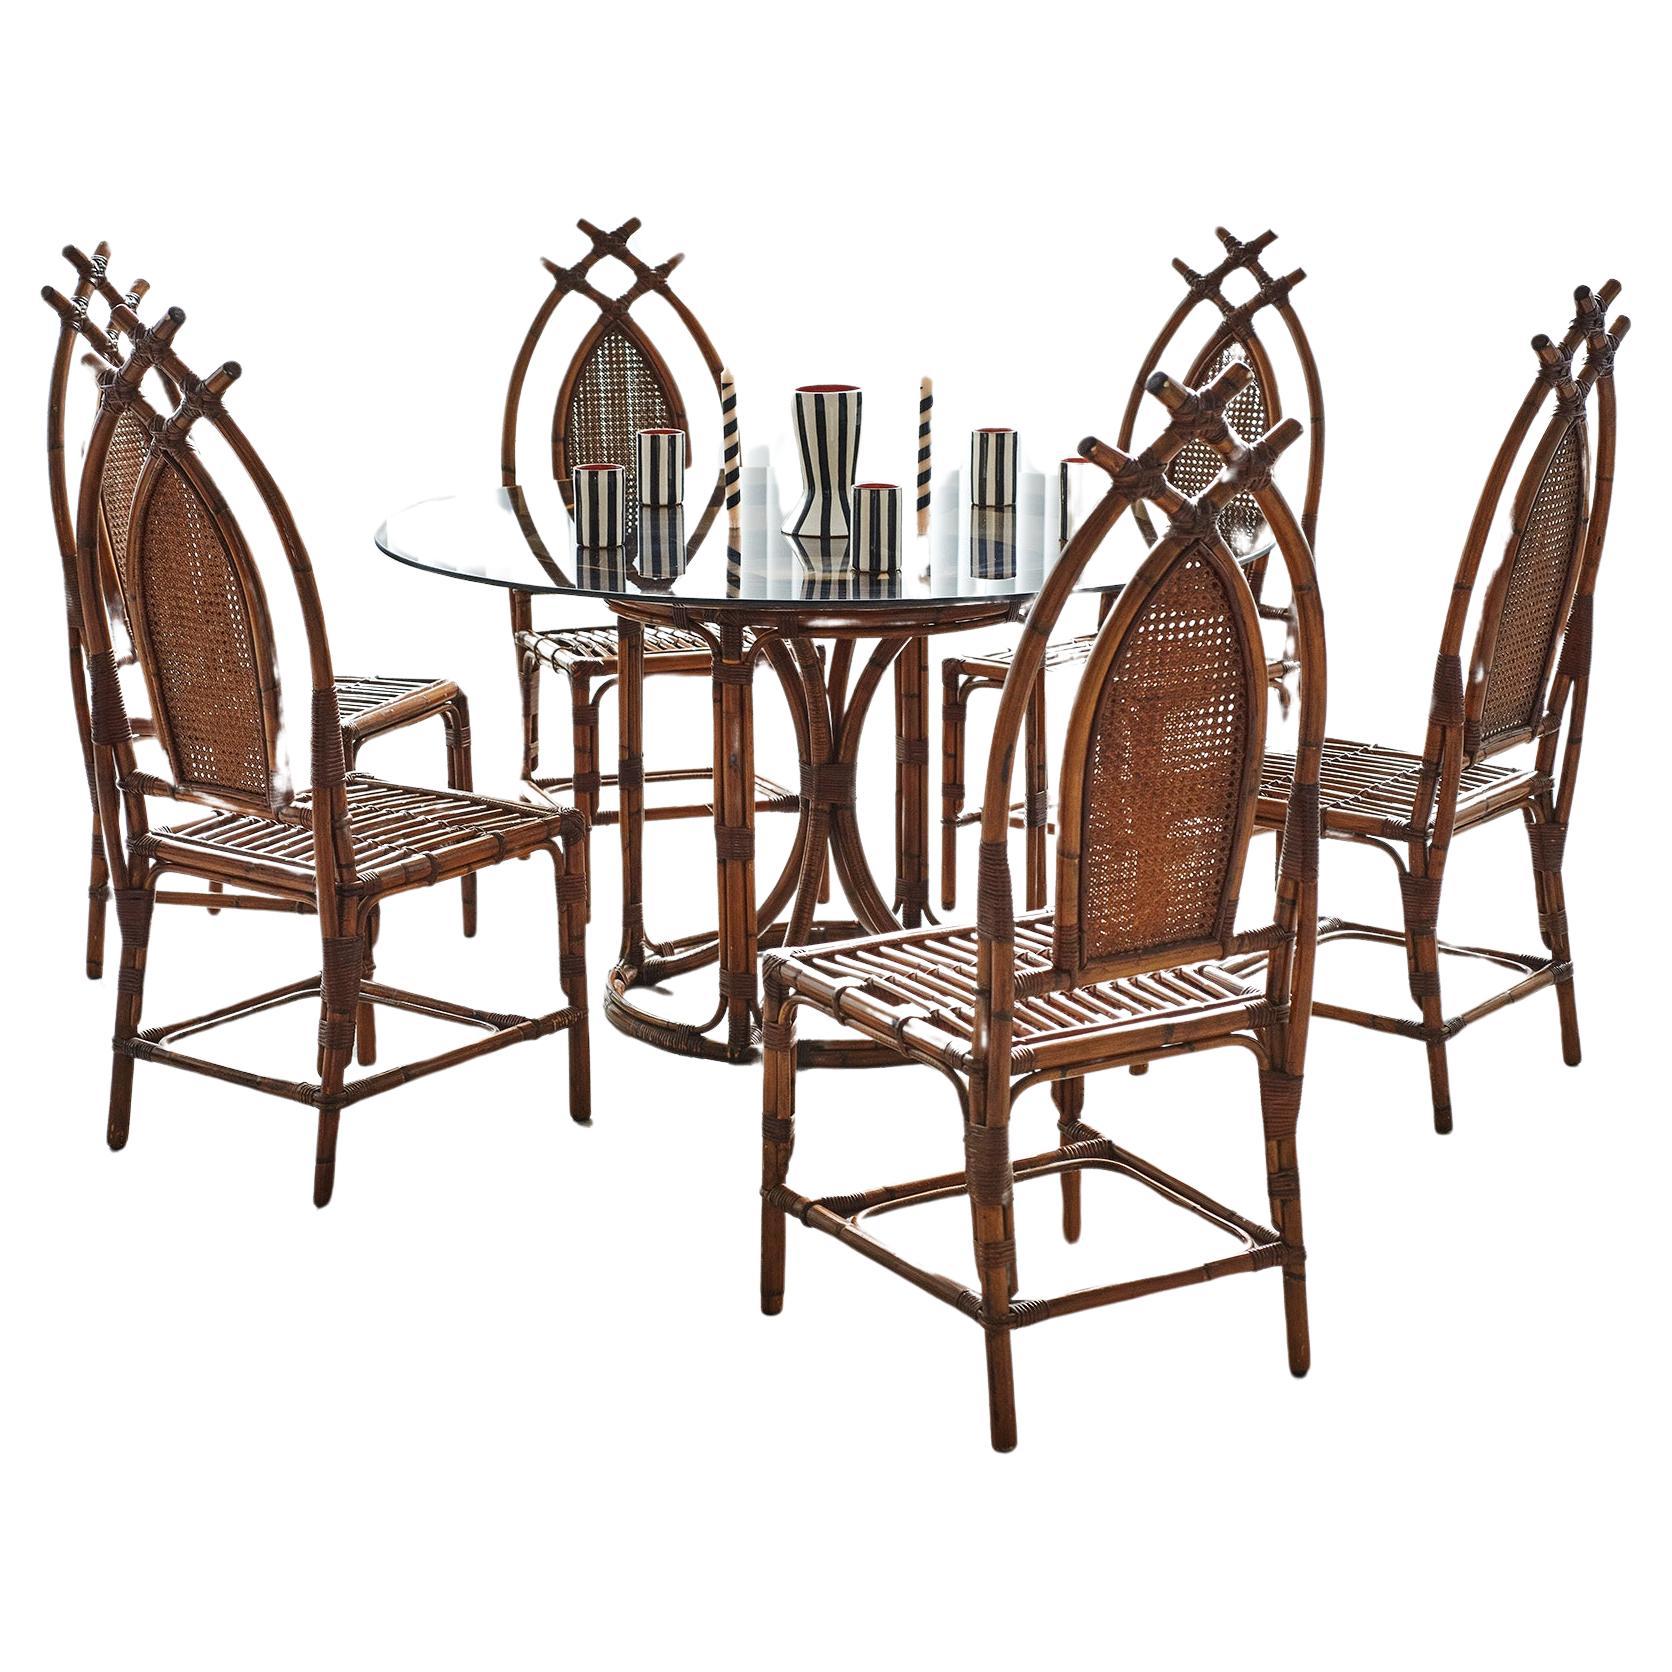 Vintage bamboo dining set of six